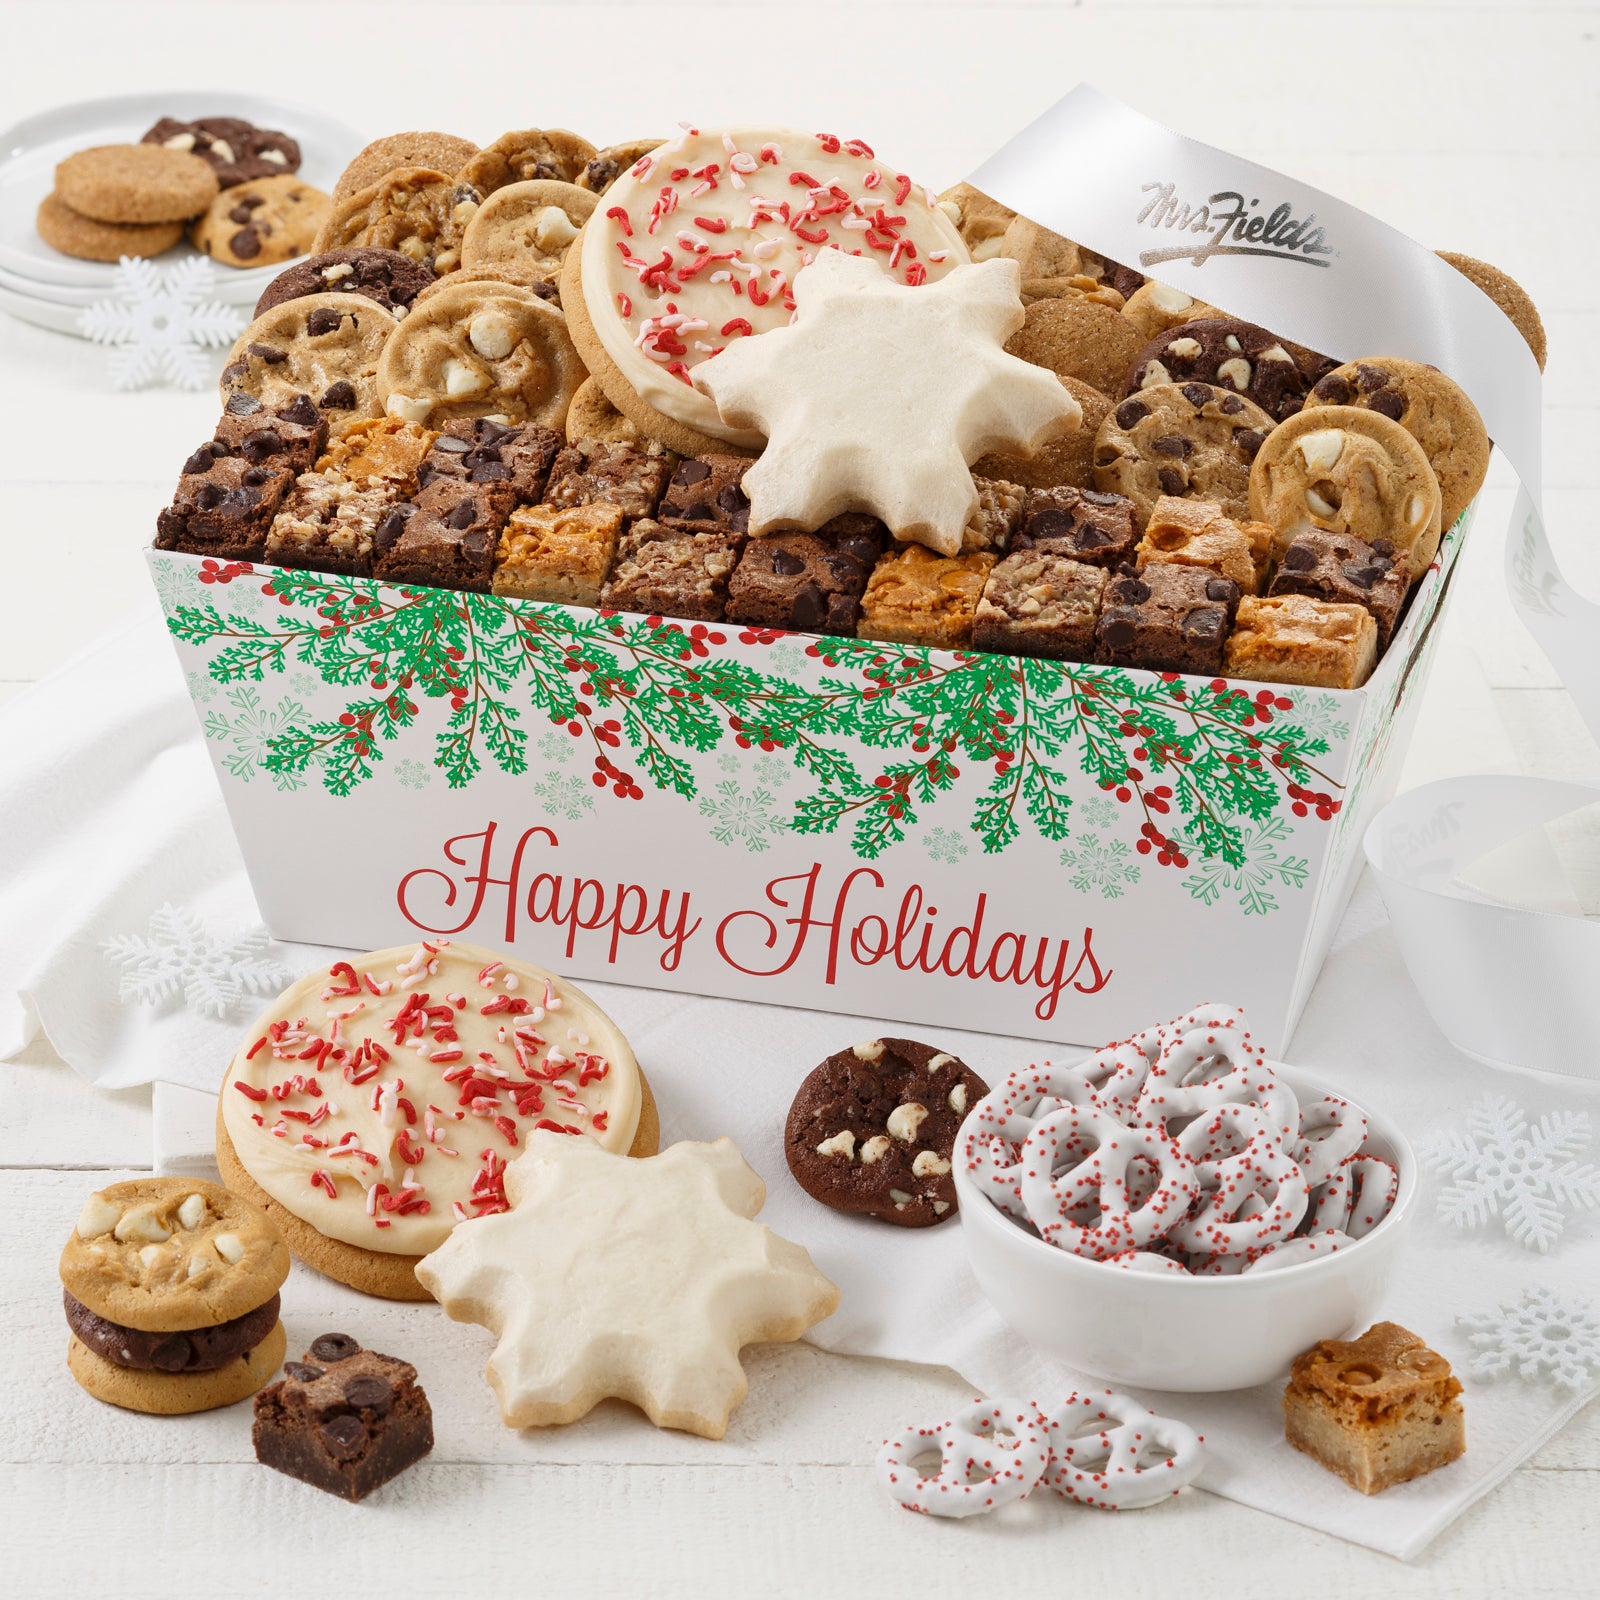 A Happy Holidays with holly decorations crate with an assortment of Nibblers®, brownie bites, two frosted peppermint round cookies with sprinkles, two frosted snowflakes and yogurt-covered pretzels